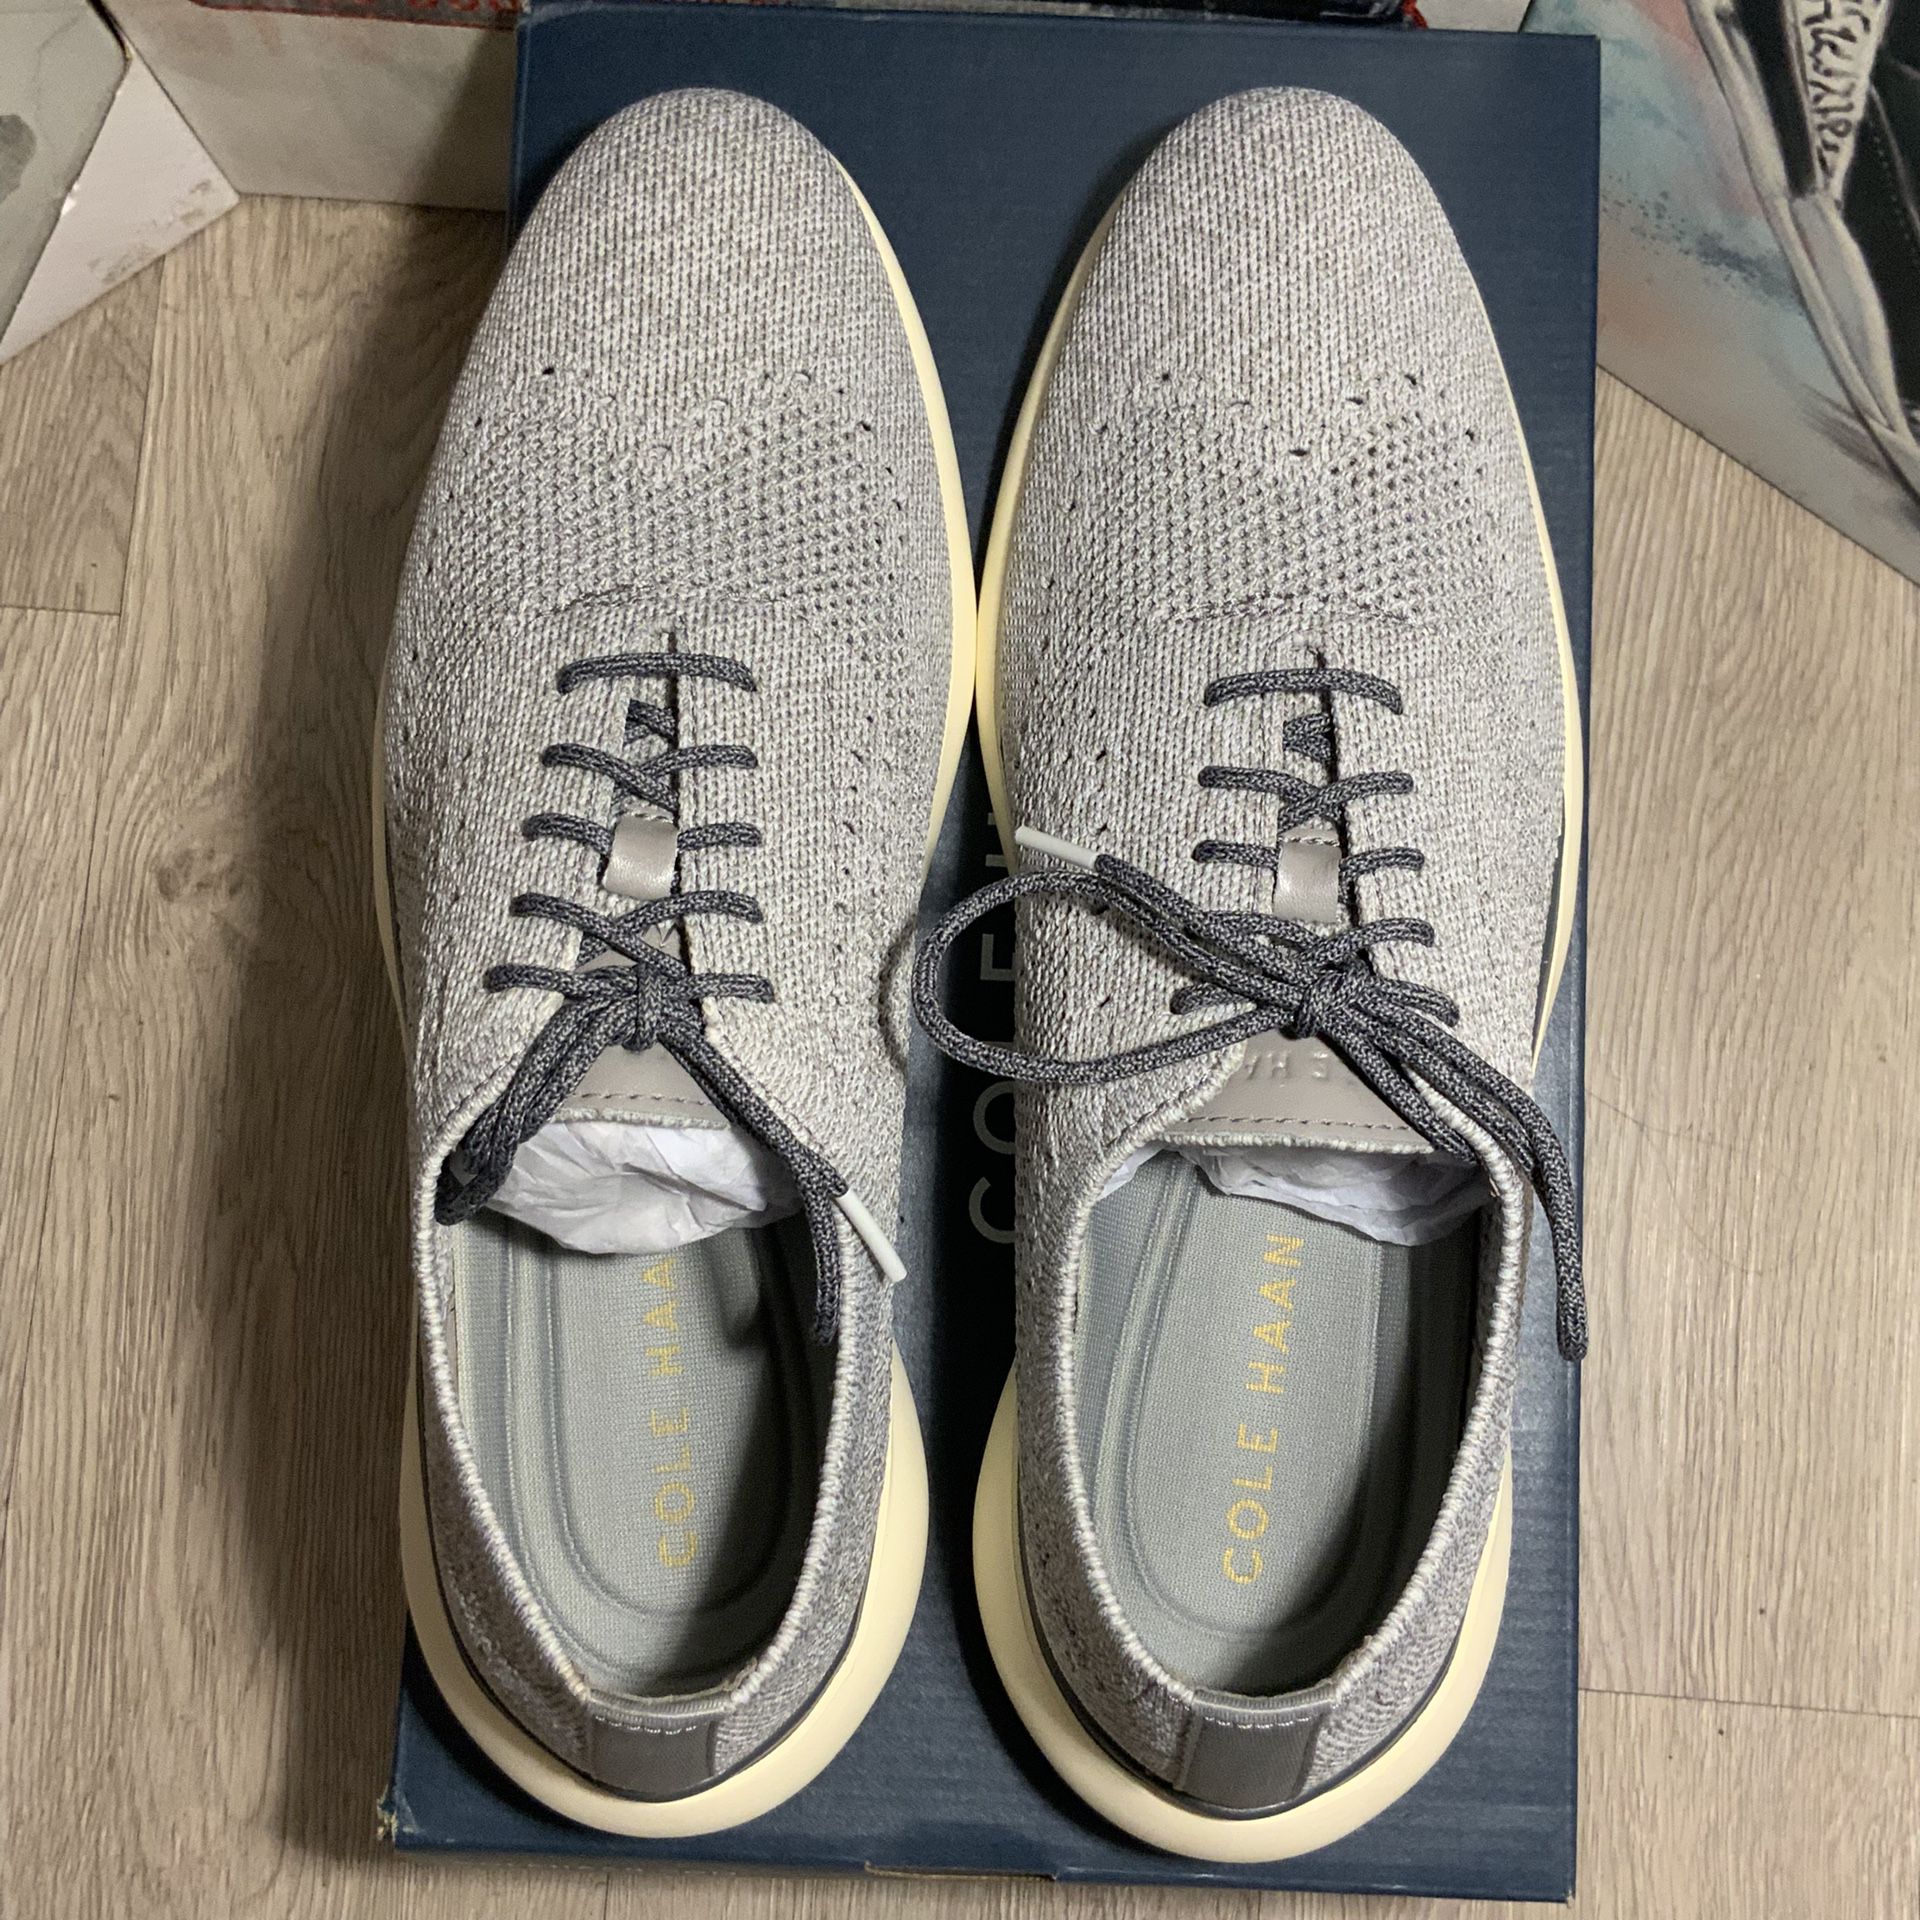 New Cole Haan Grand Troy Knit Wingtip Oxford Sneakers Shoes Gray Mens ...